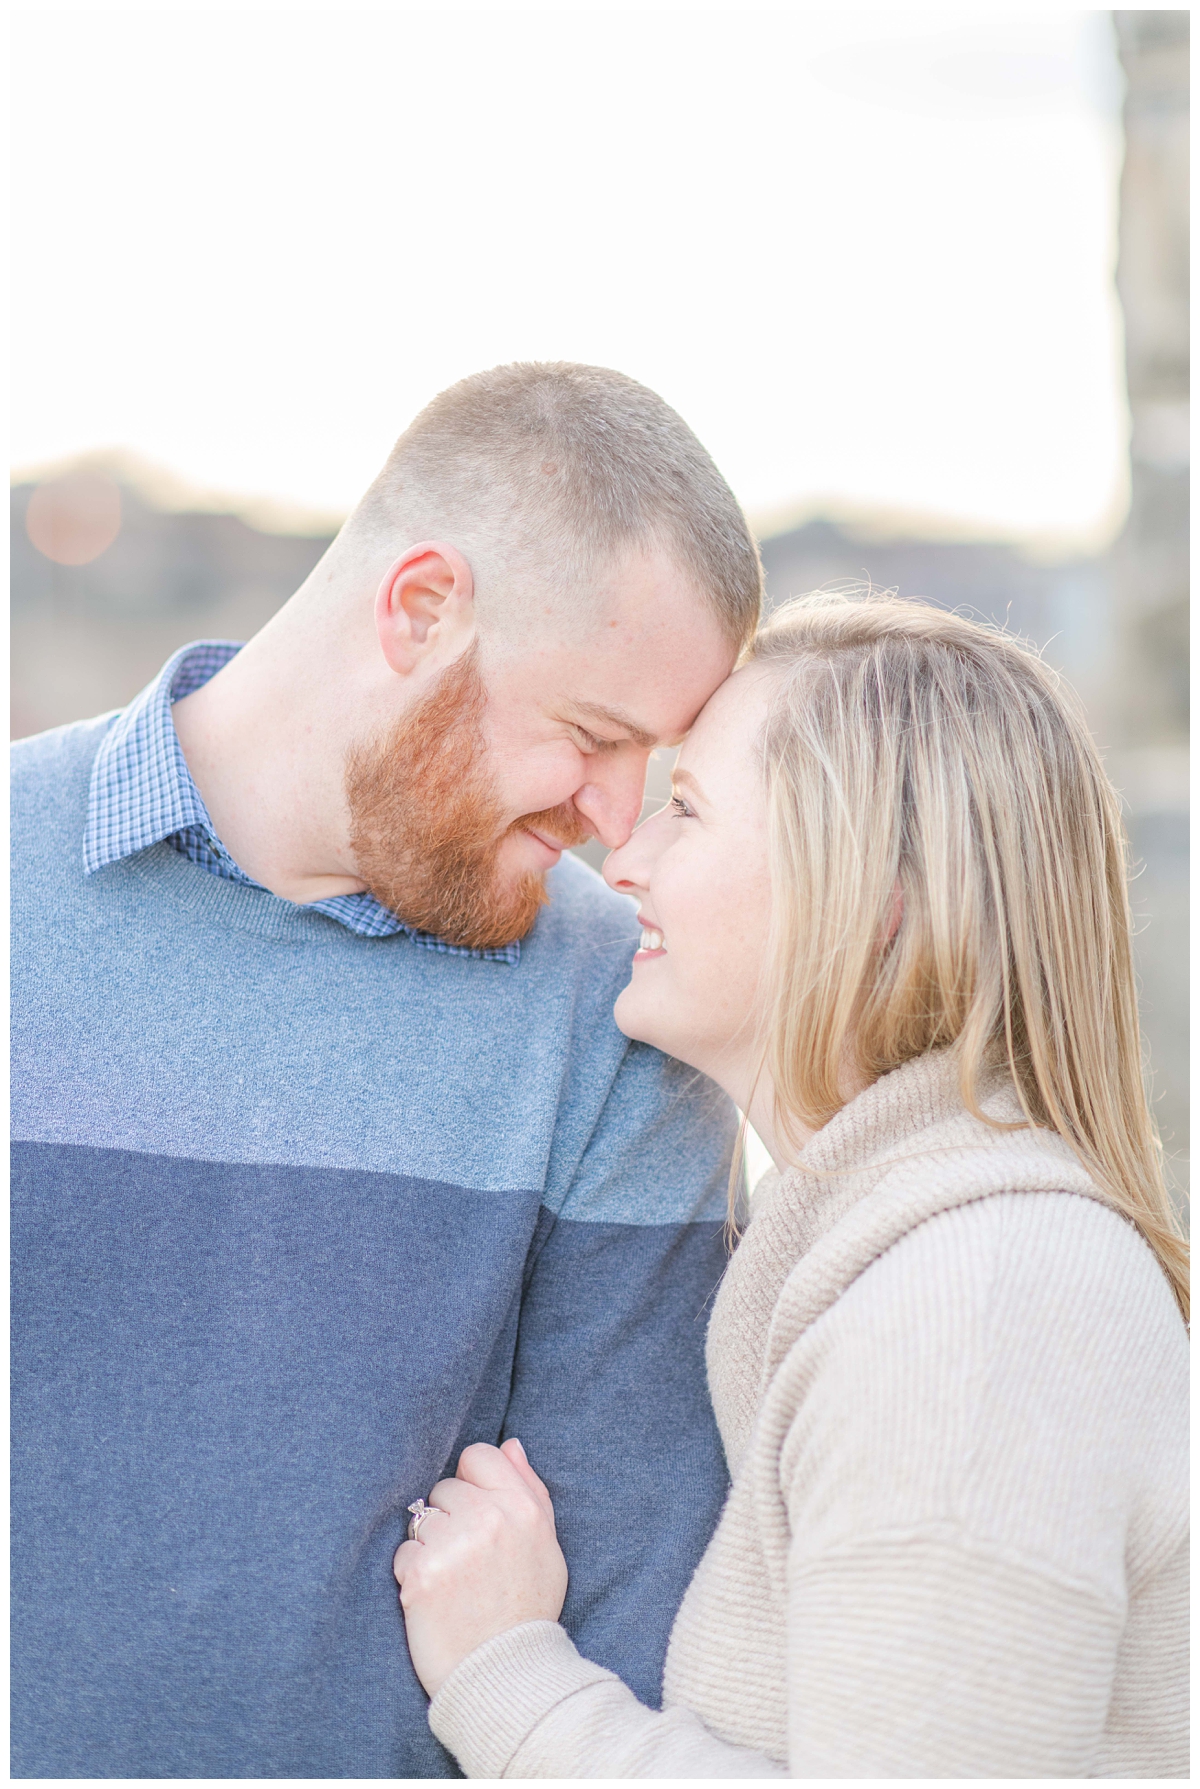 Romantic Engagement Session at Fairmouth